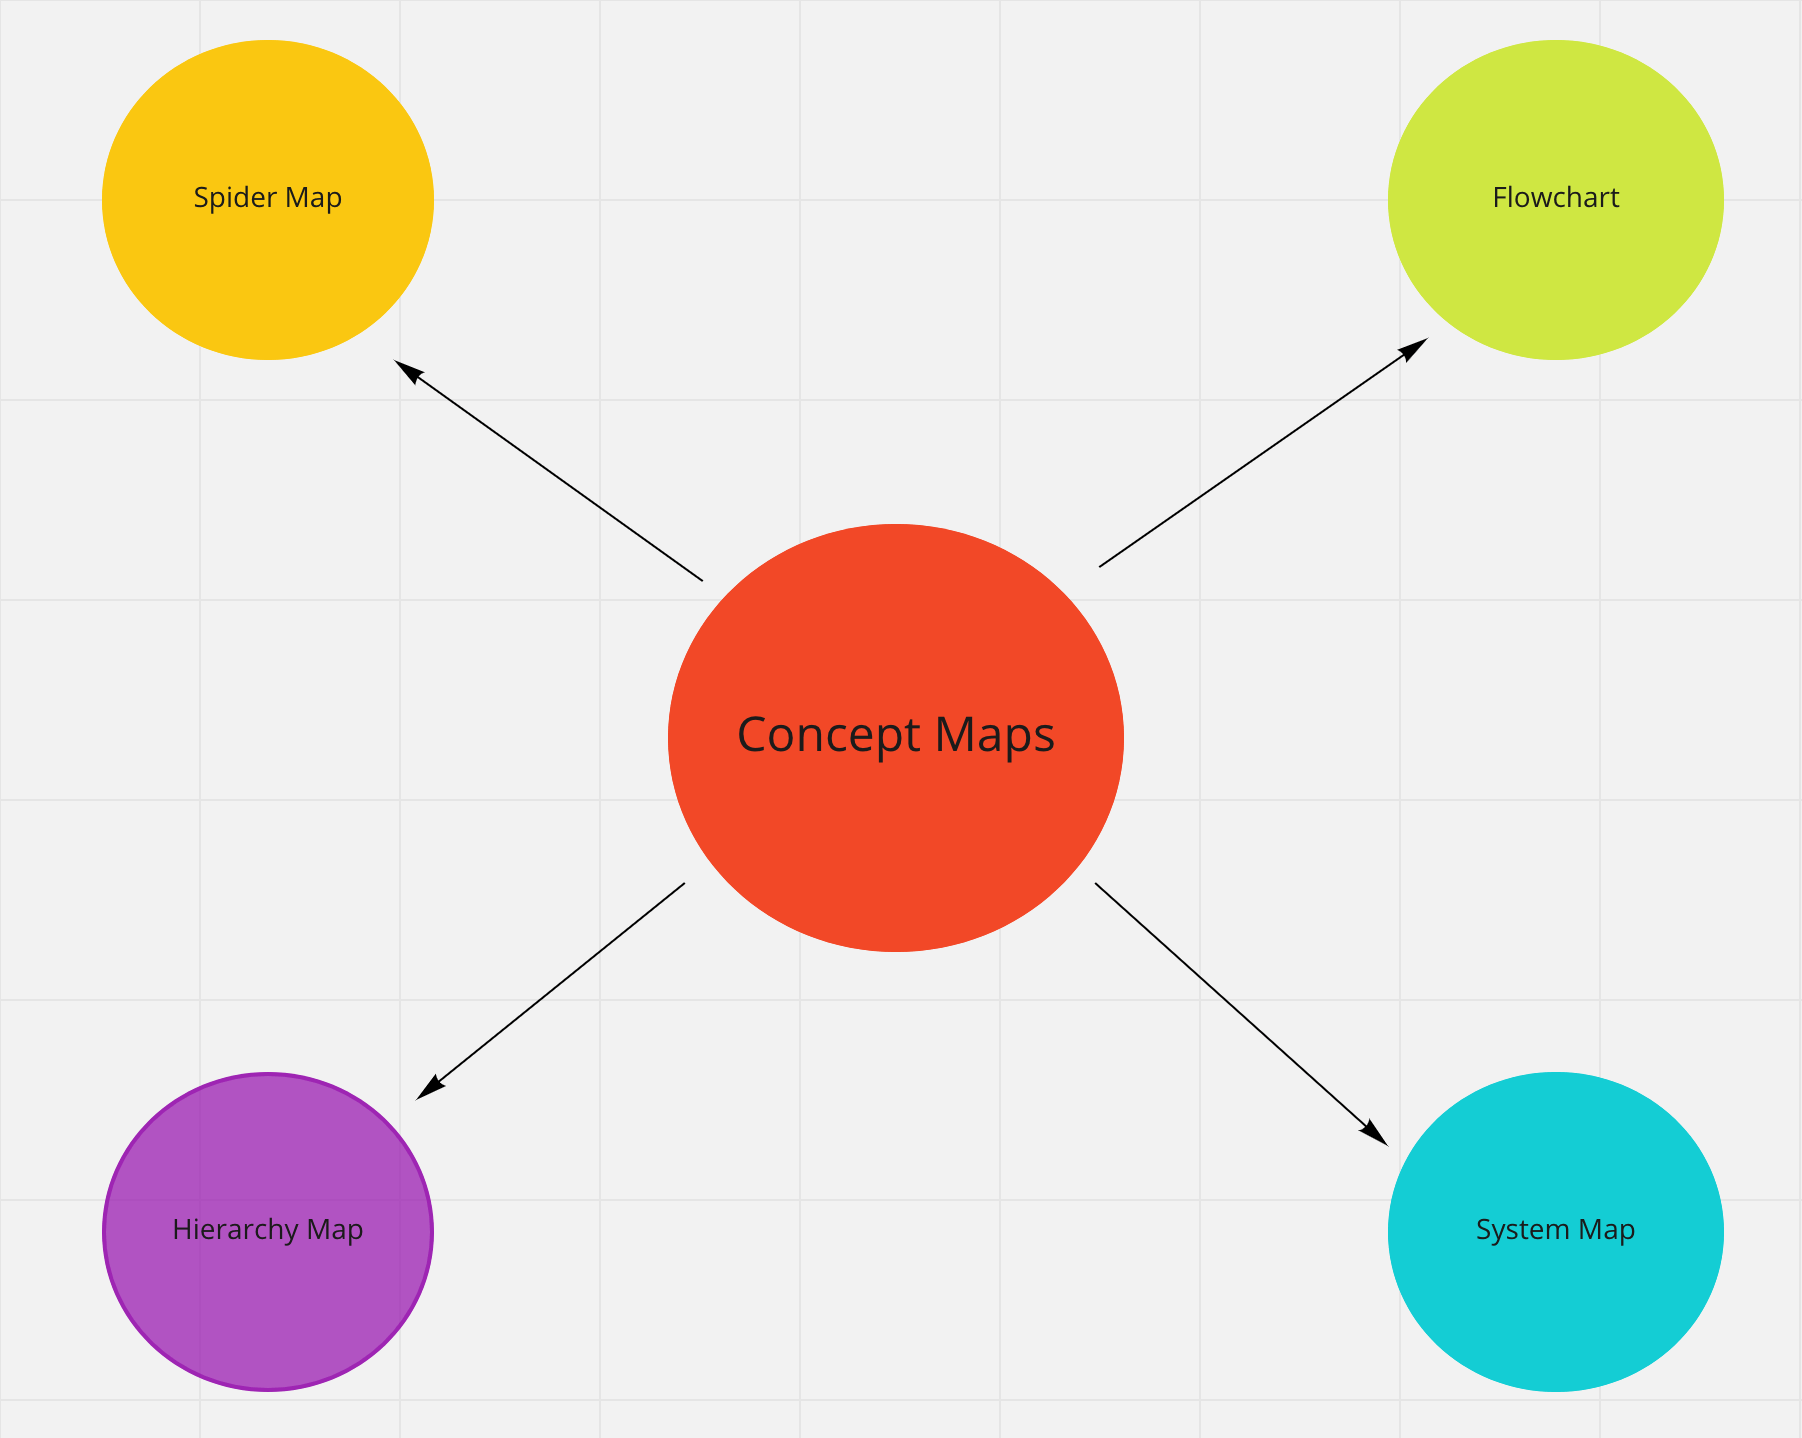 spider map - concept map